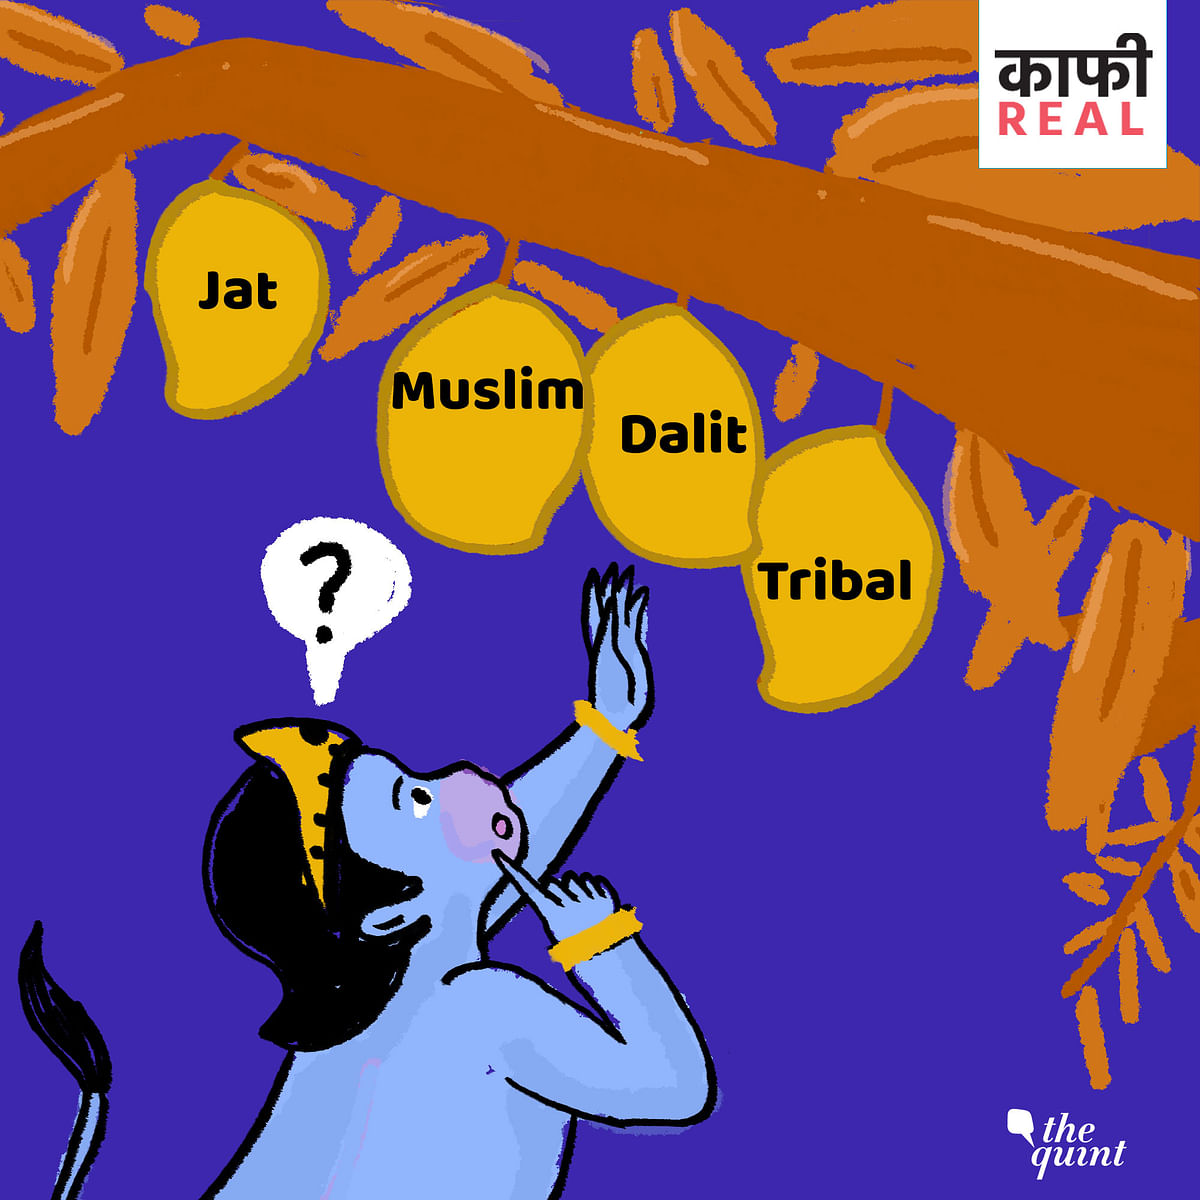 Catch the latest in The Quint’s cartoon series ‘Kaafi Real’.